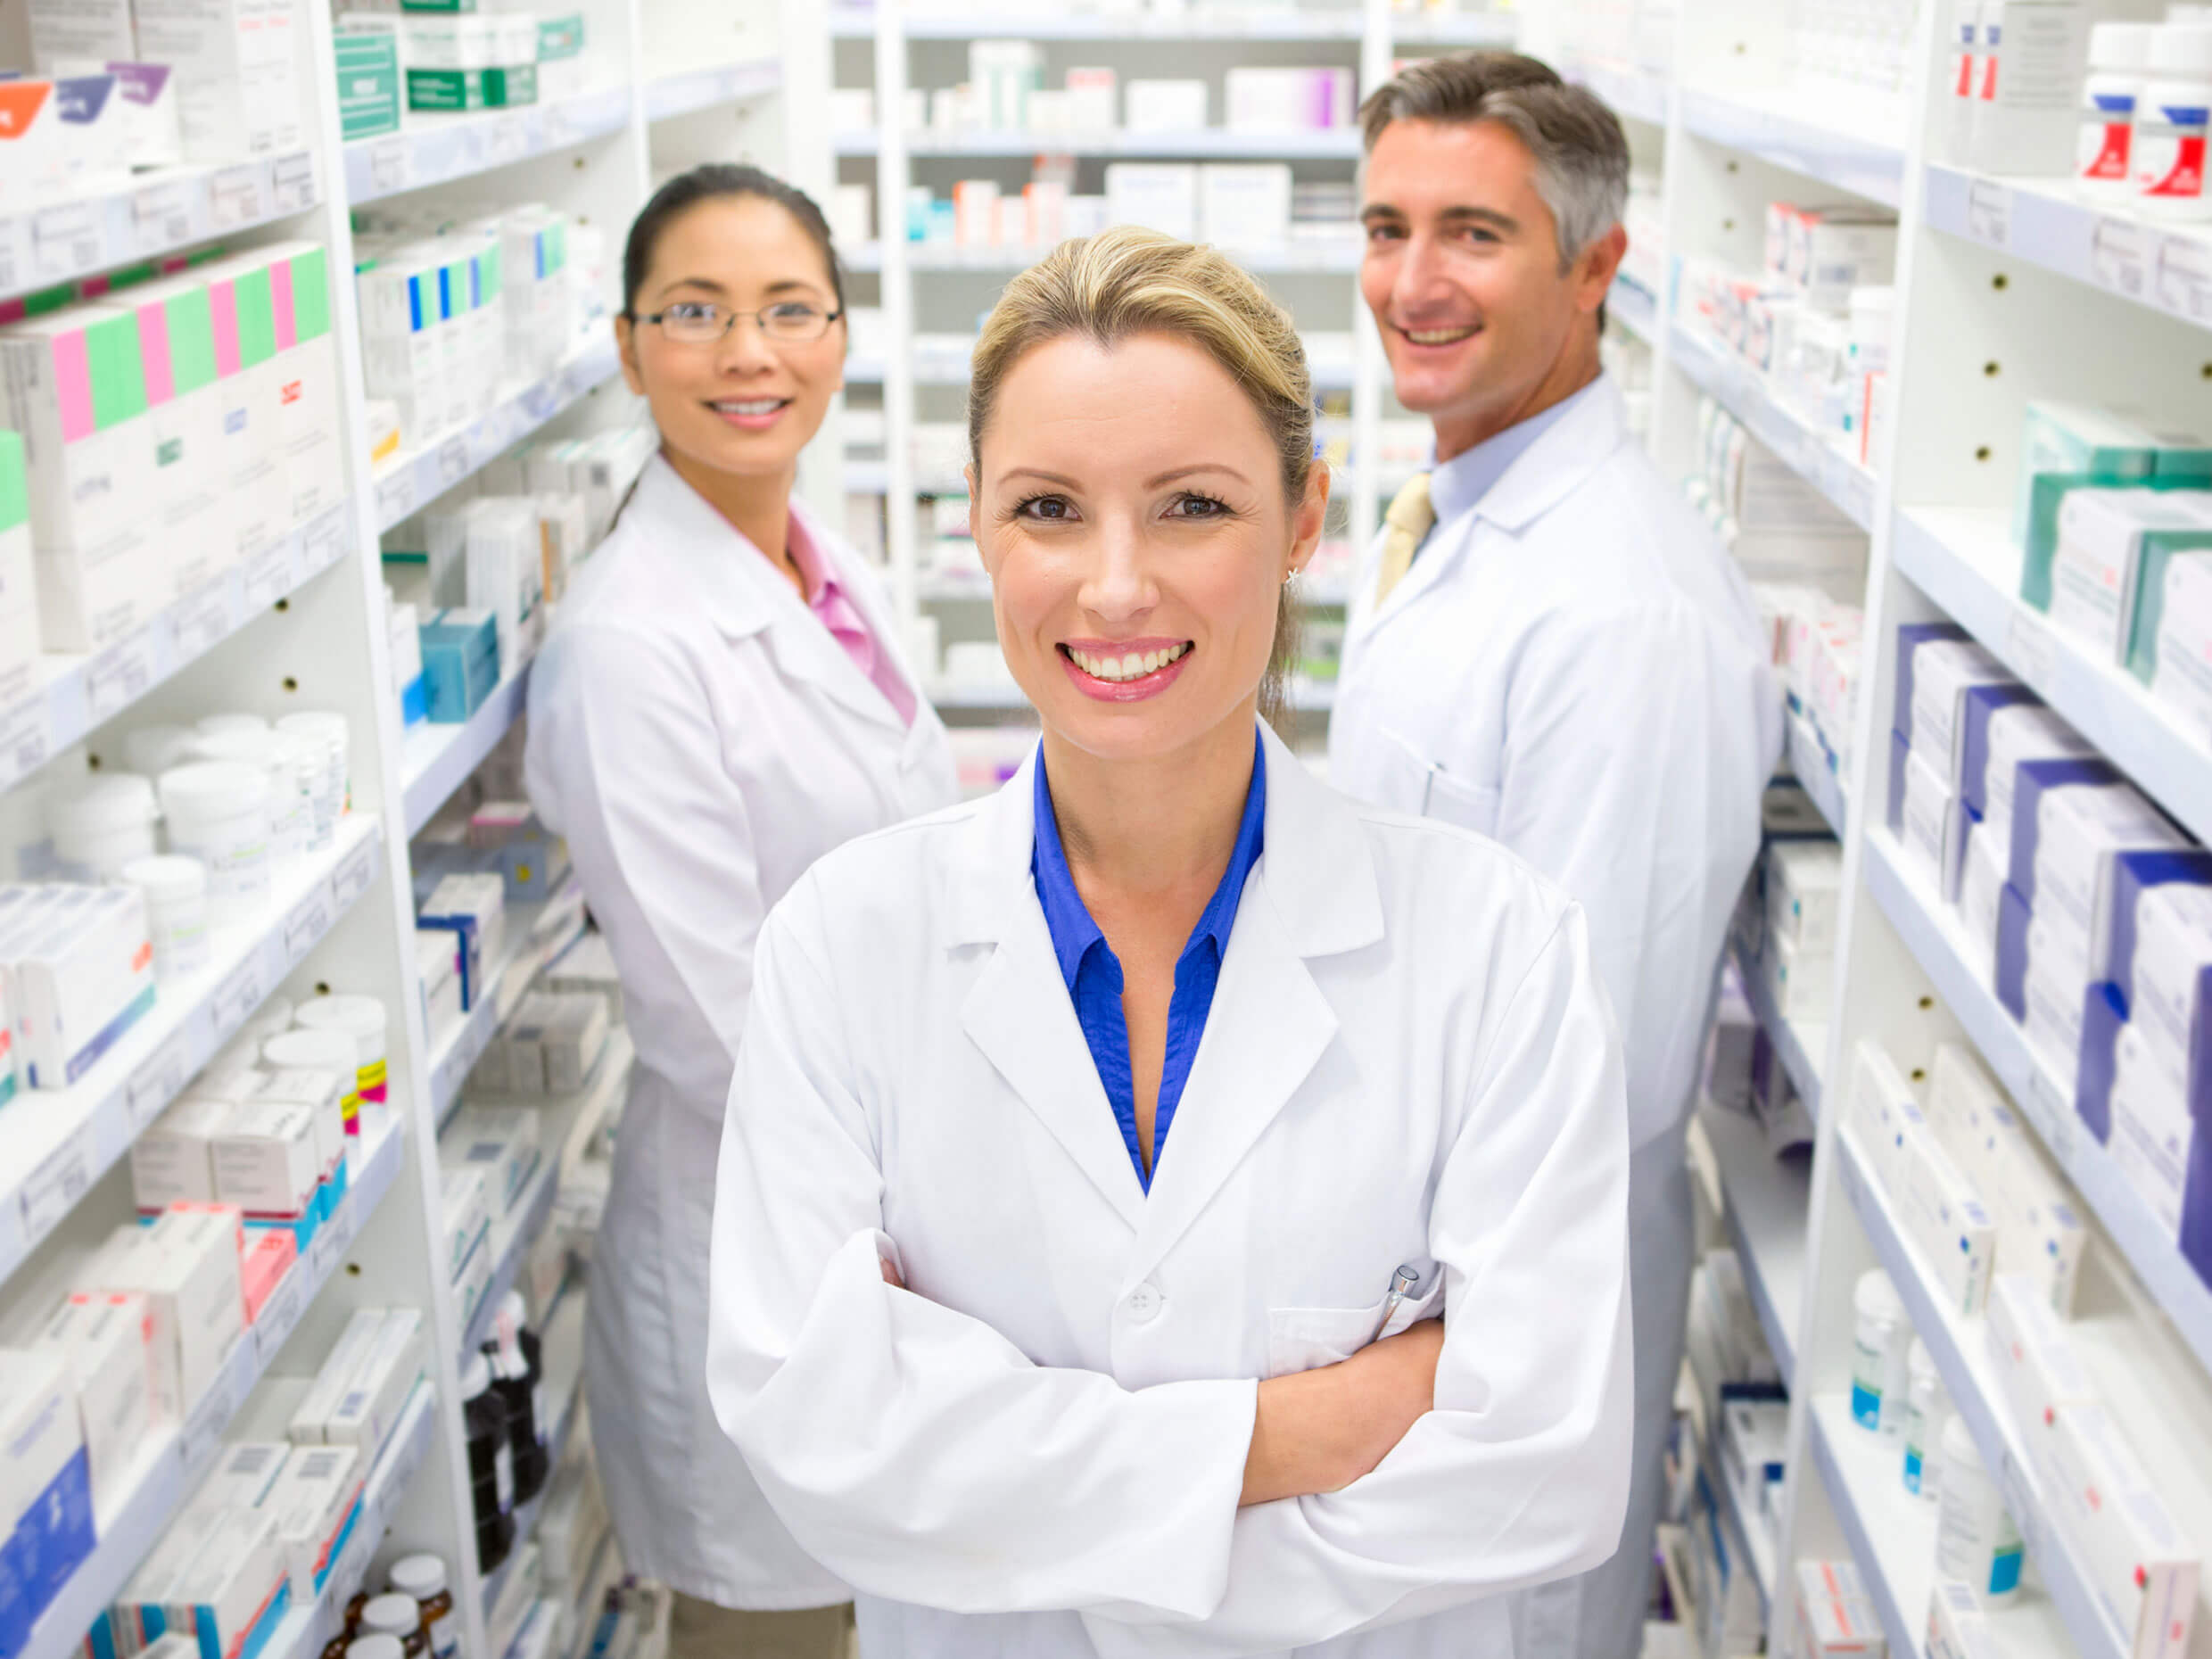 A Pharmacy Assistant confidently standing with a licensed Pharmacist and a Pharmacy Technician in their workplace, a retail pharmacy